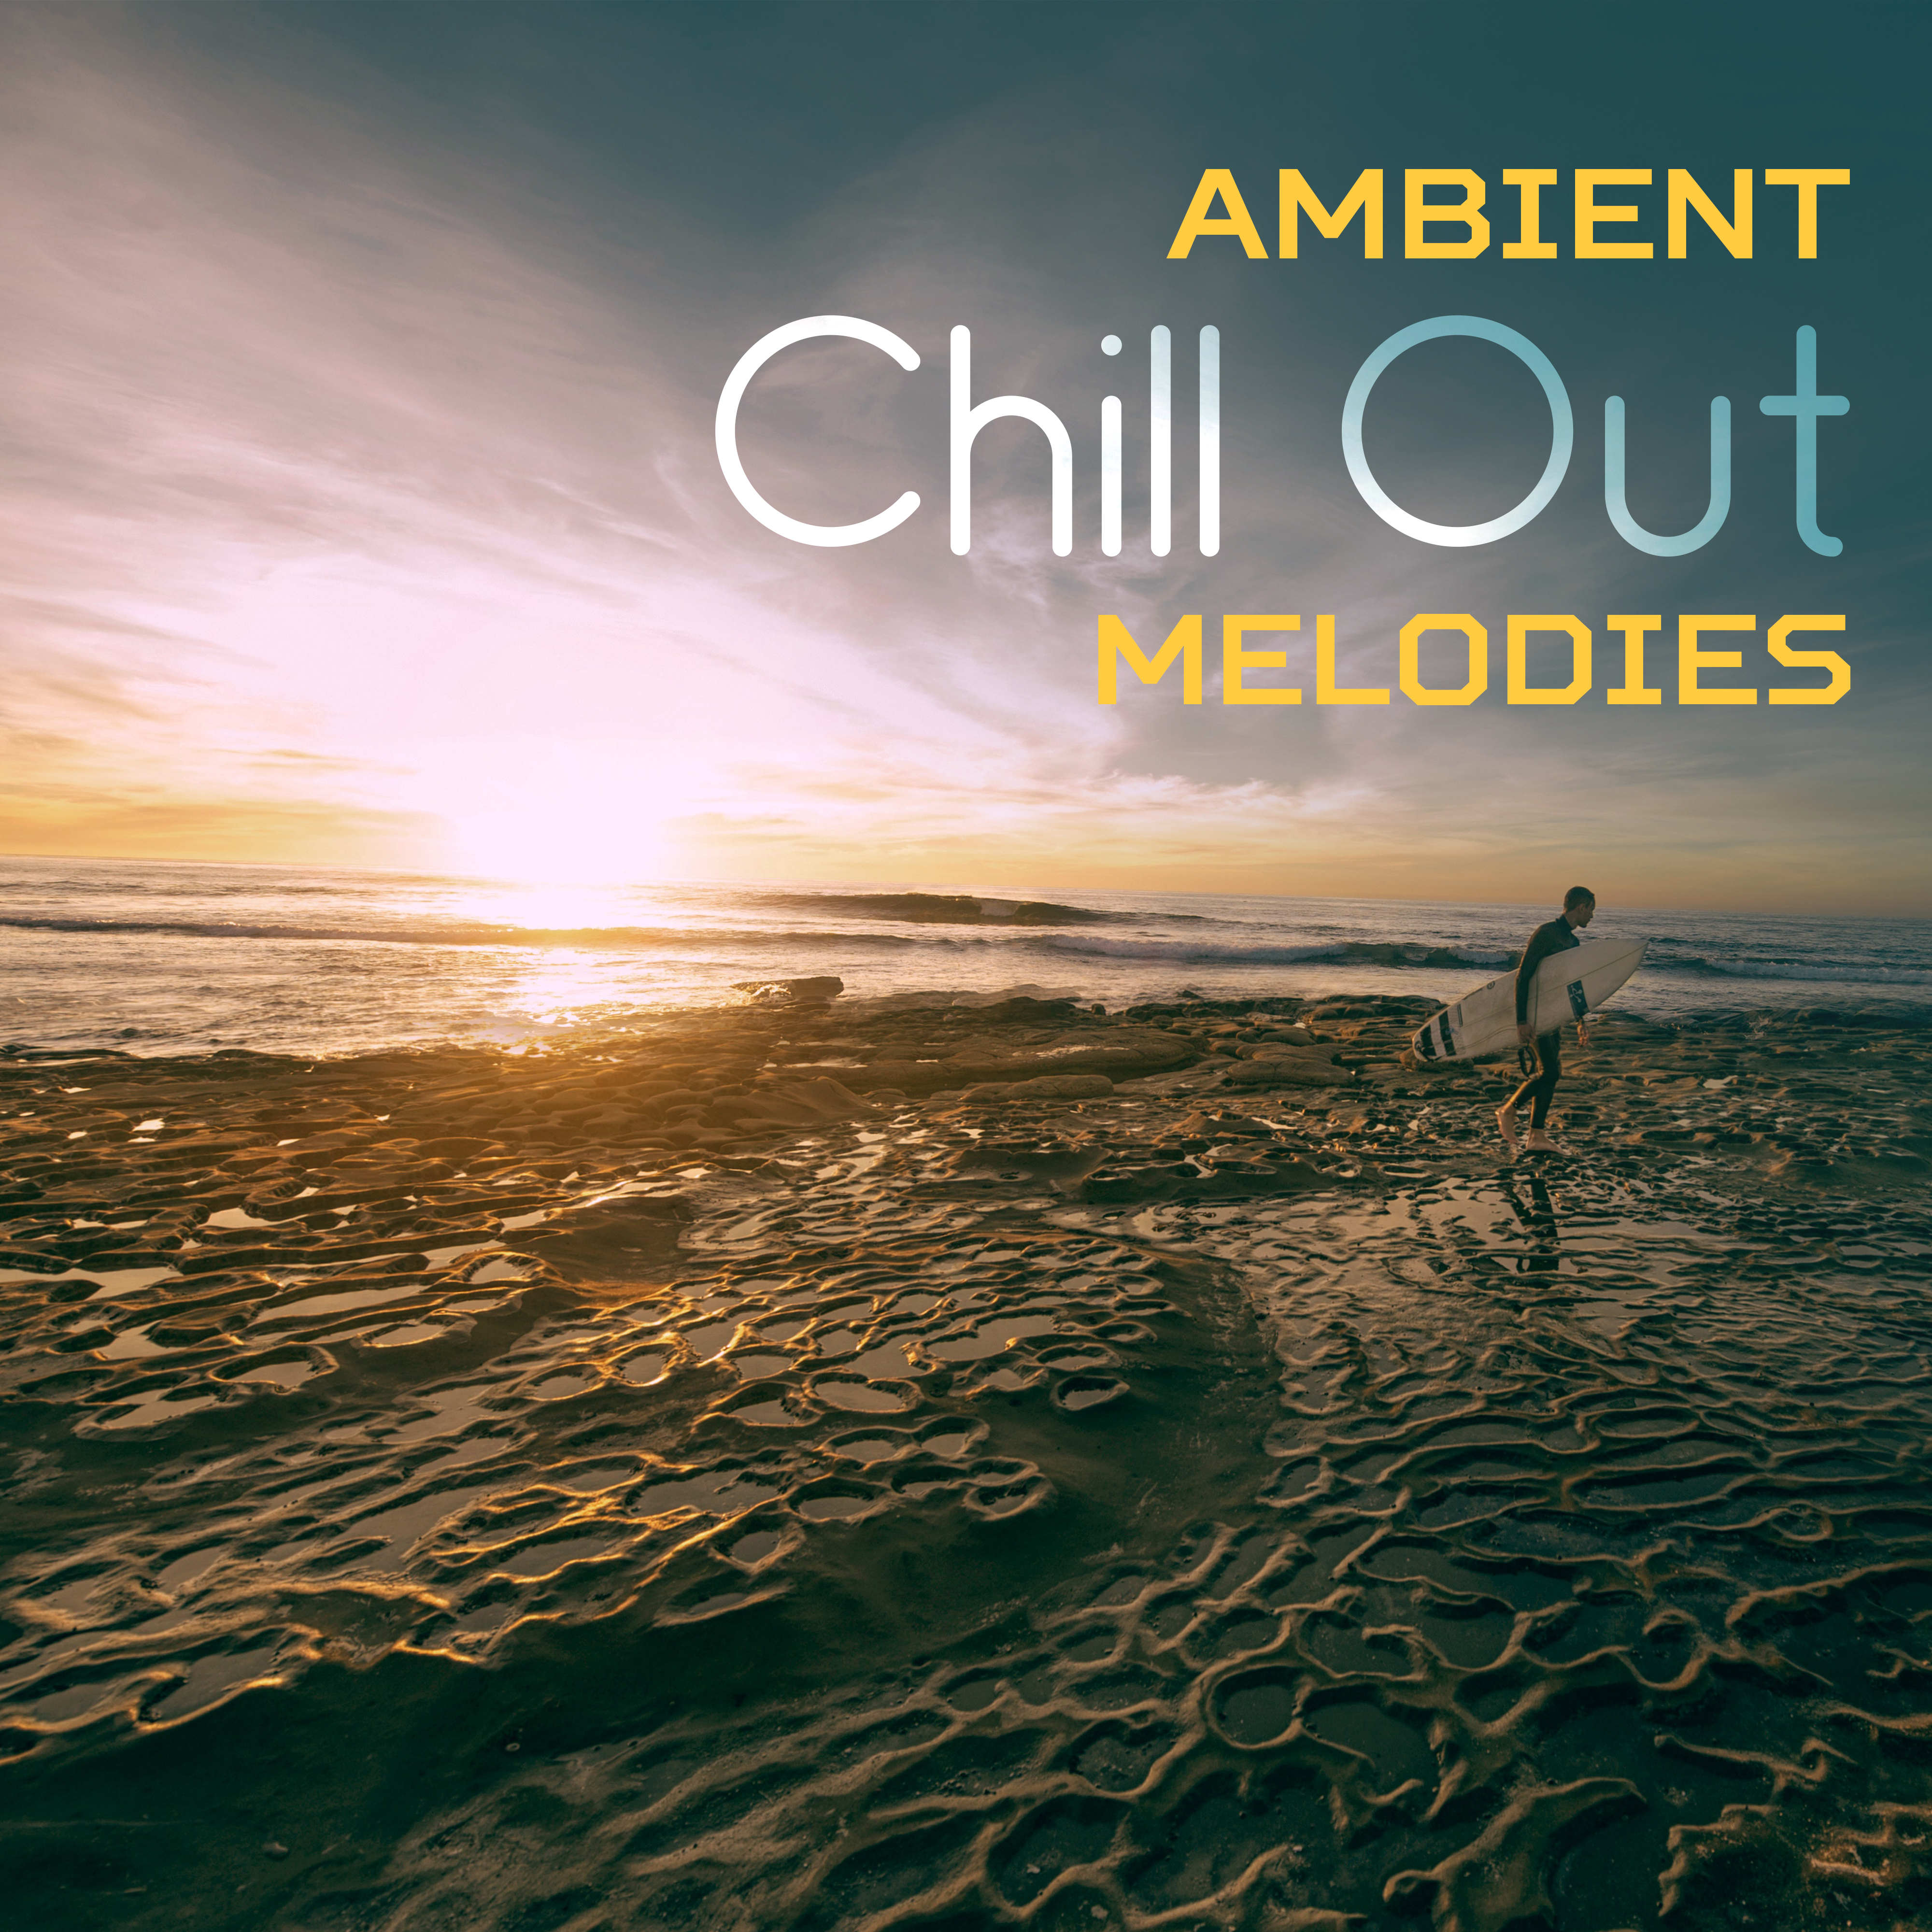 Ambient Chill Out Melodies  Calm Down with Chill Out Music, Beats for Relaxing Evening, Stress Relief